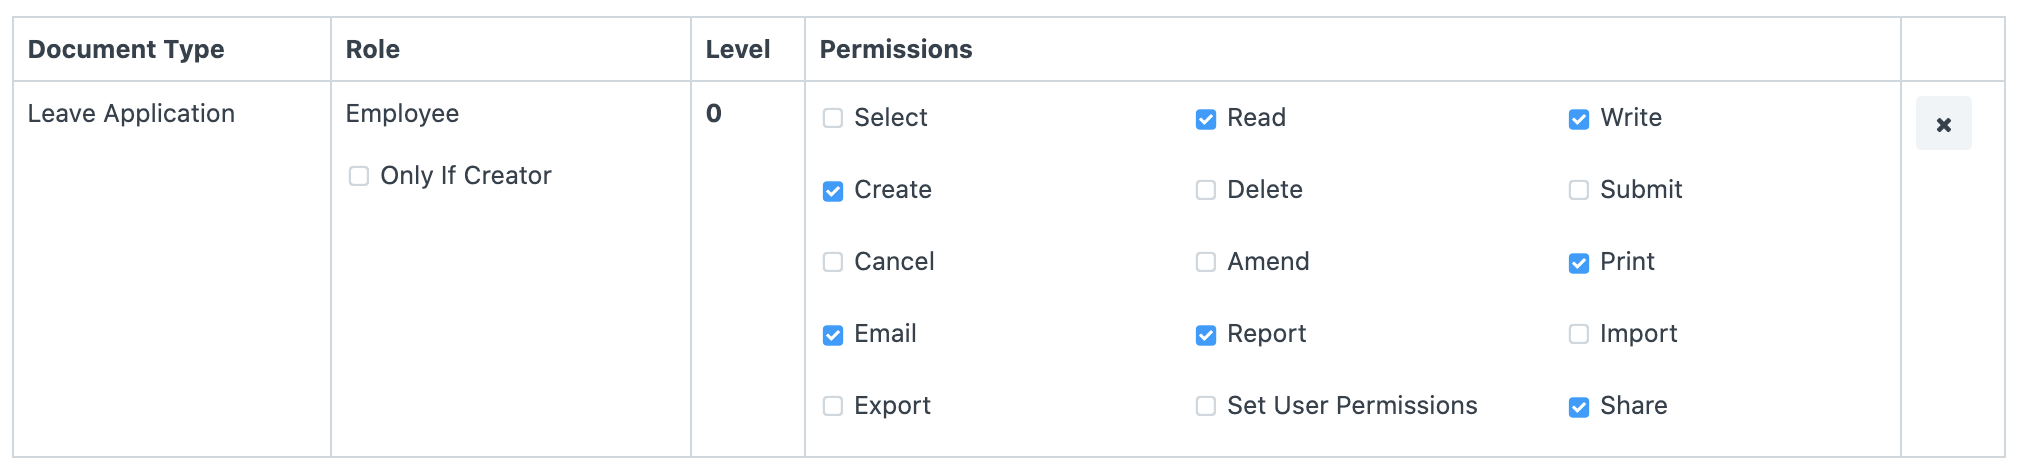 Giving Read, Write and Create Permissions to Employee for Leave Application